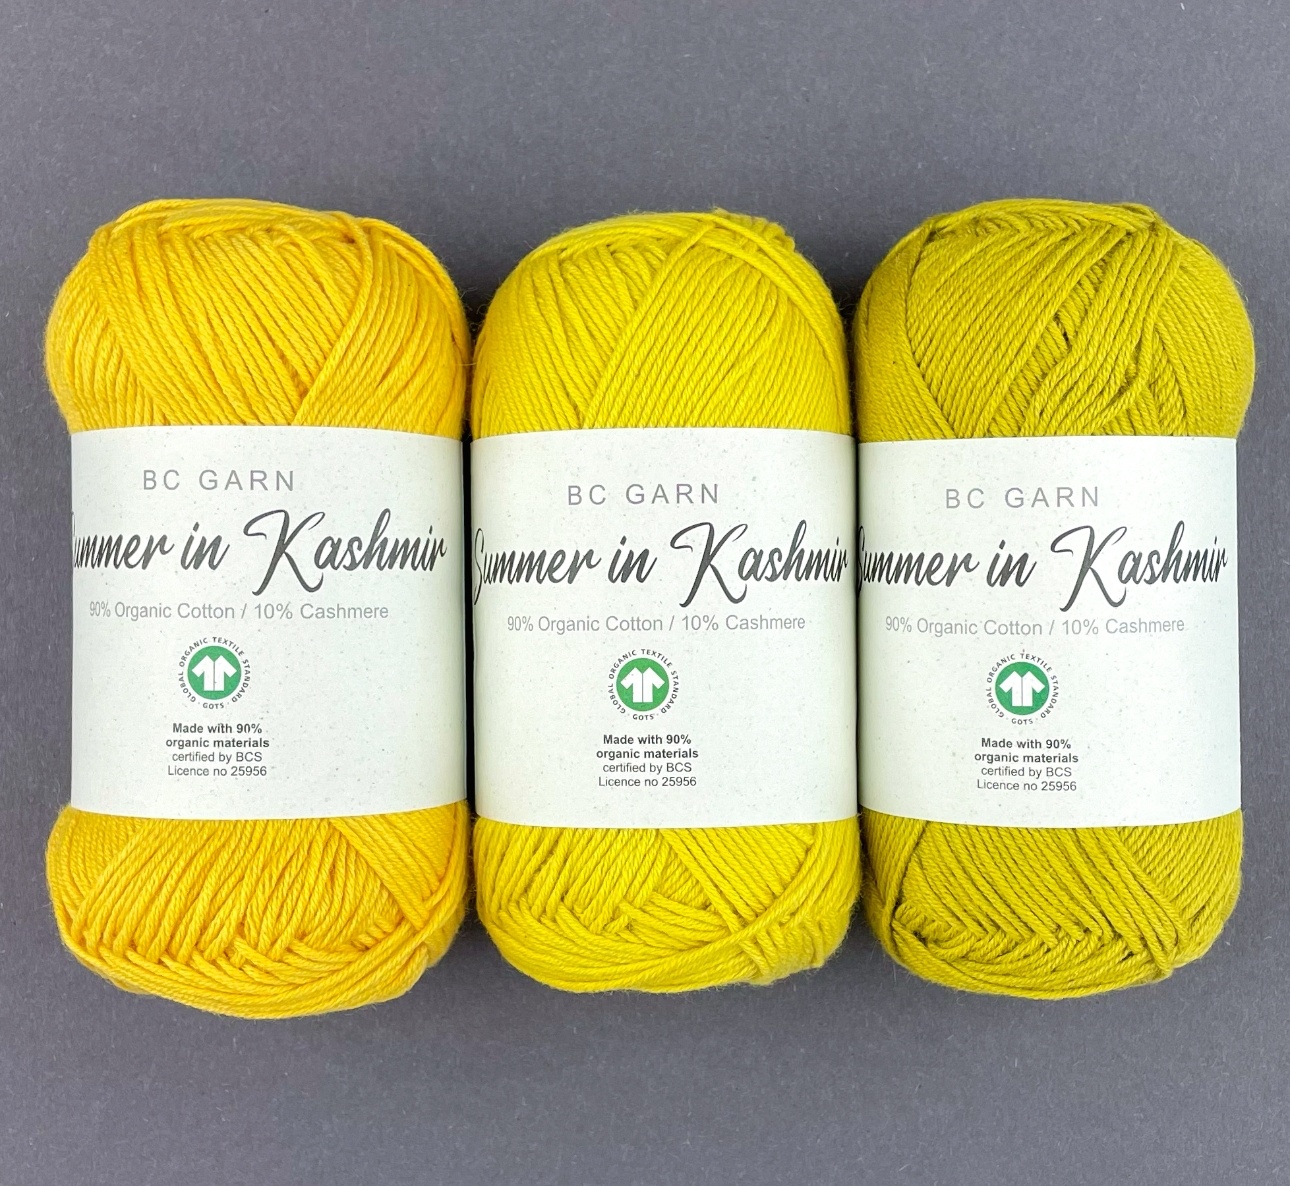 Sustainable knitting with Selected Yarns